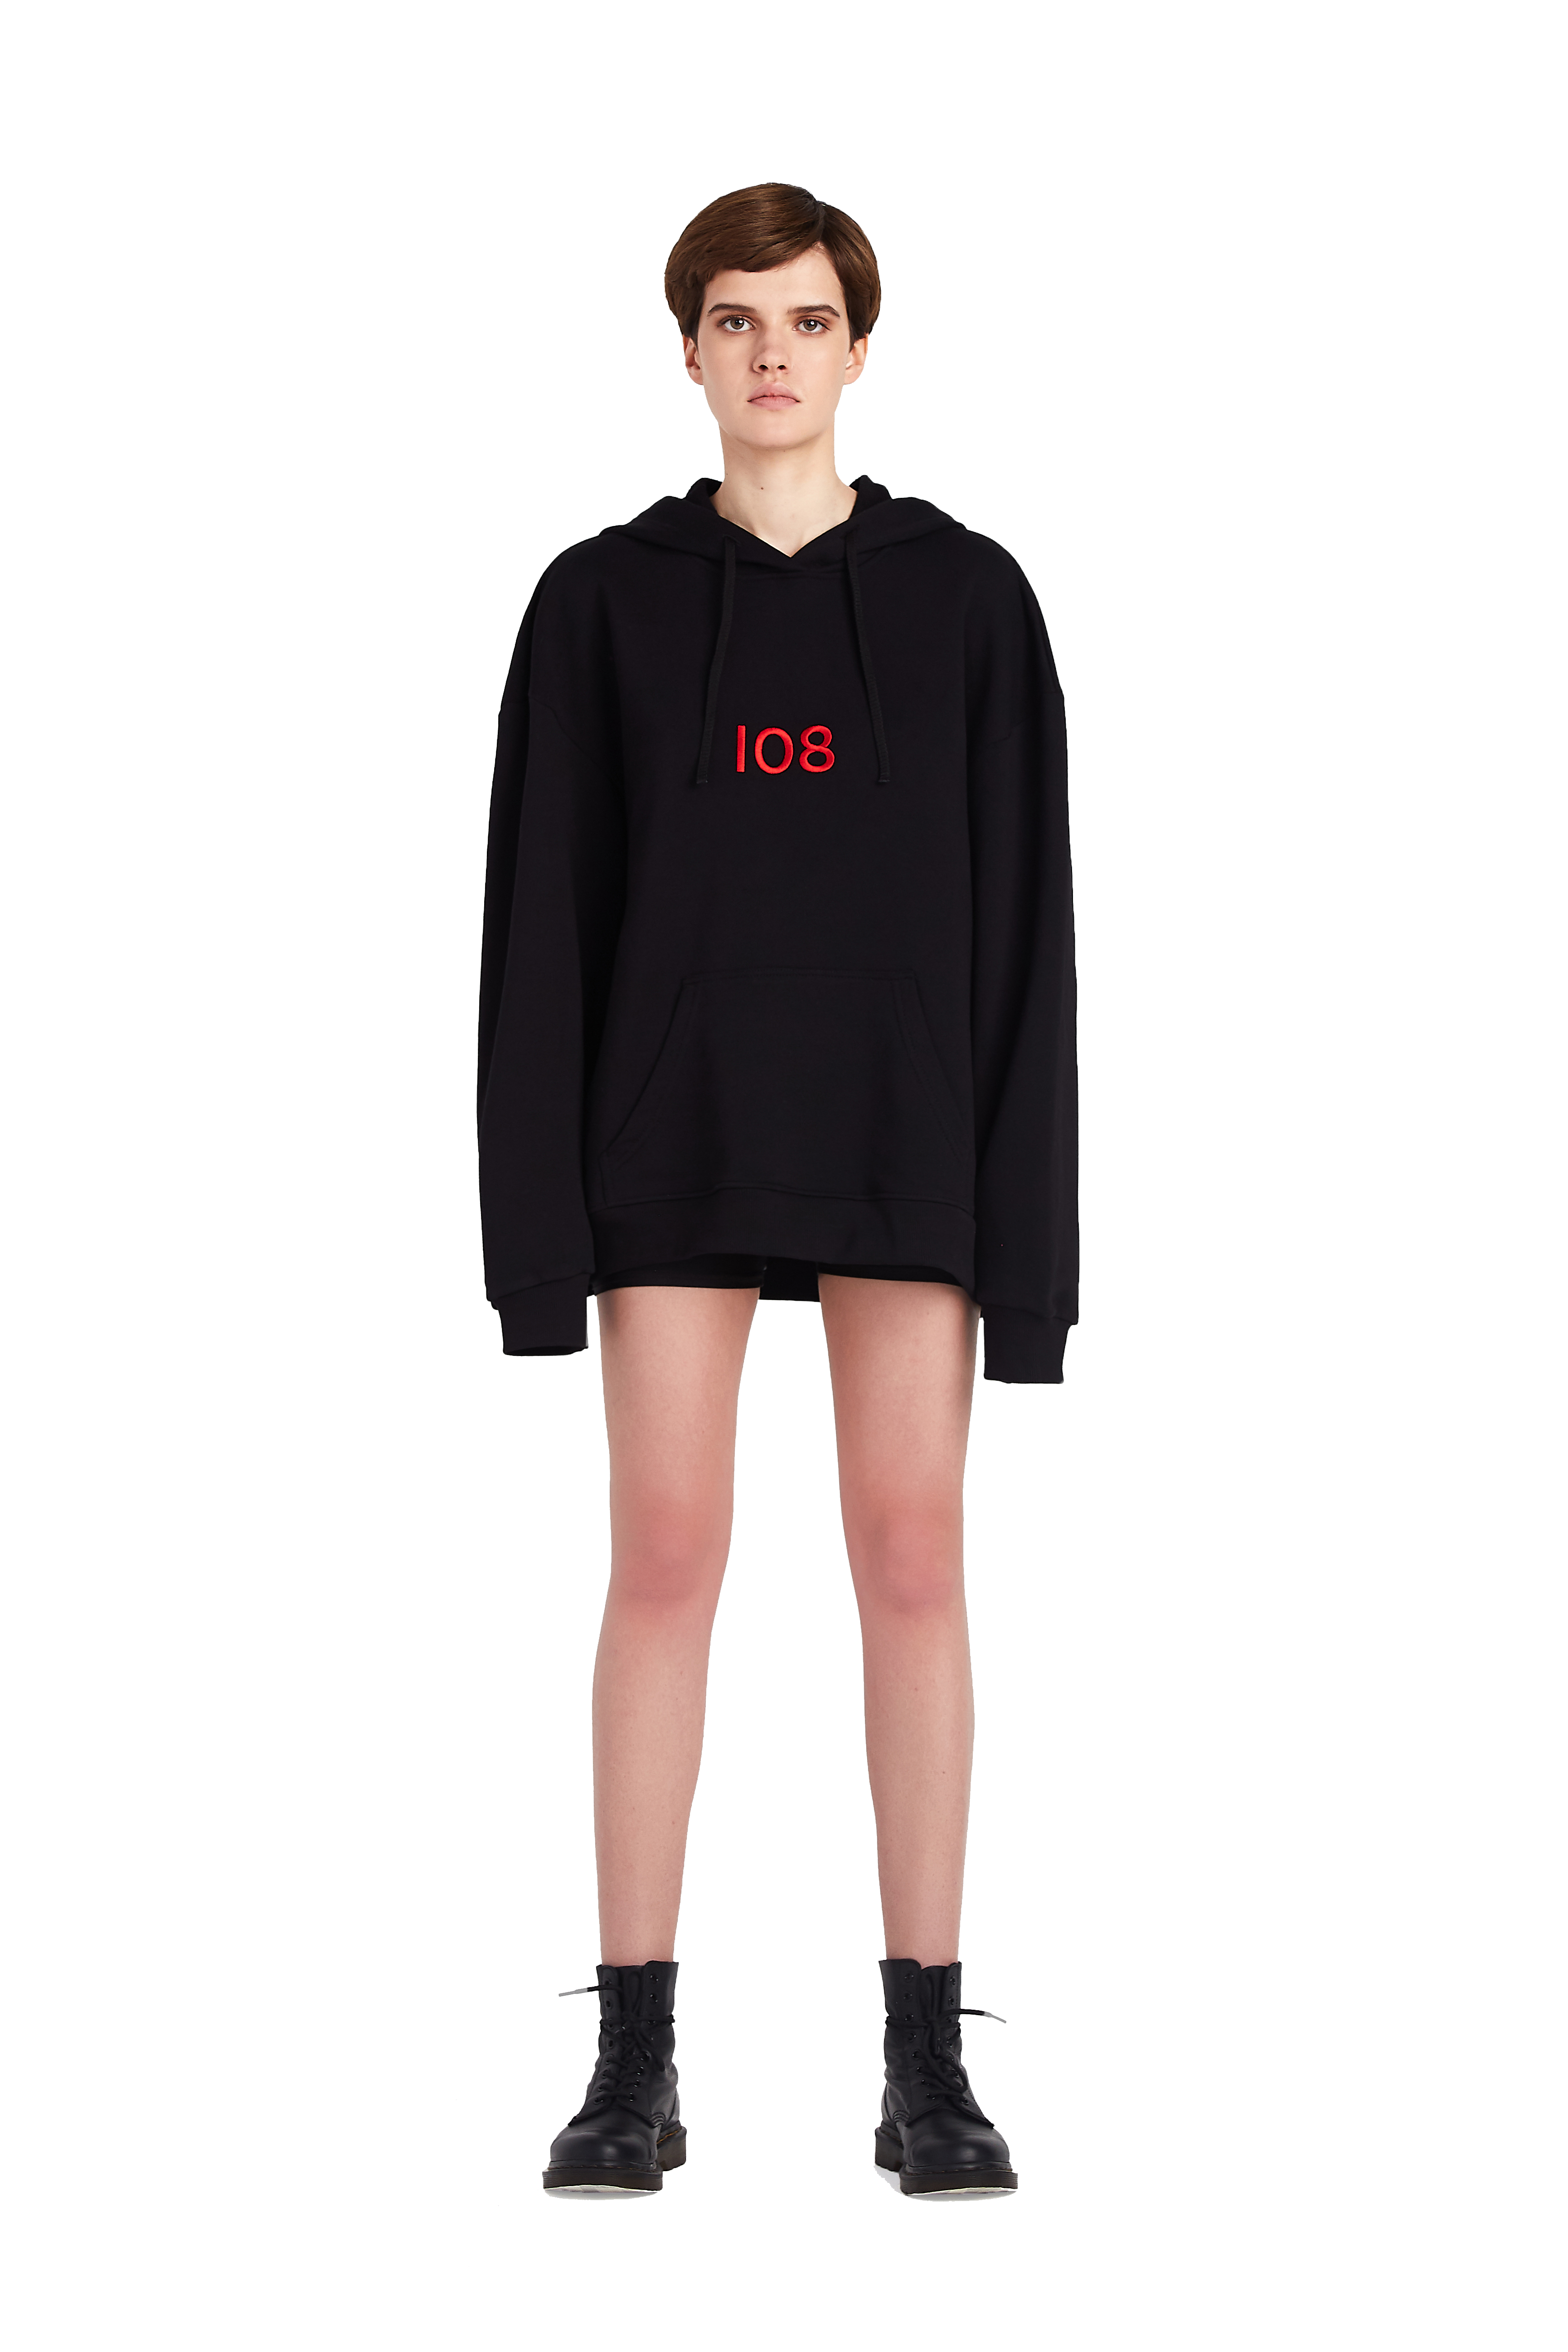 Oversized hoodie SYSTEM 108